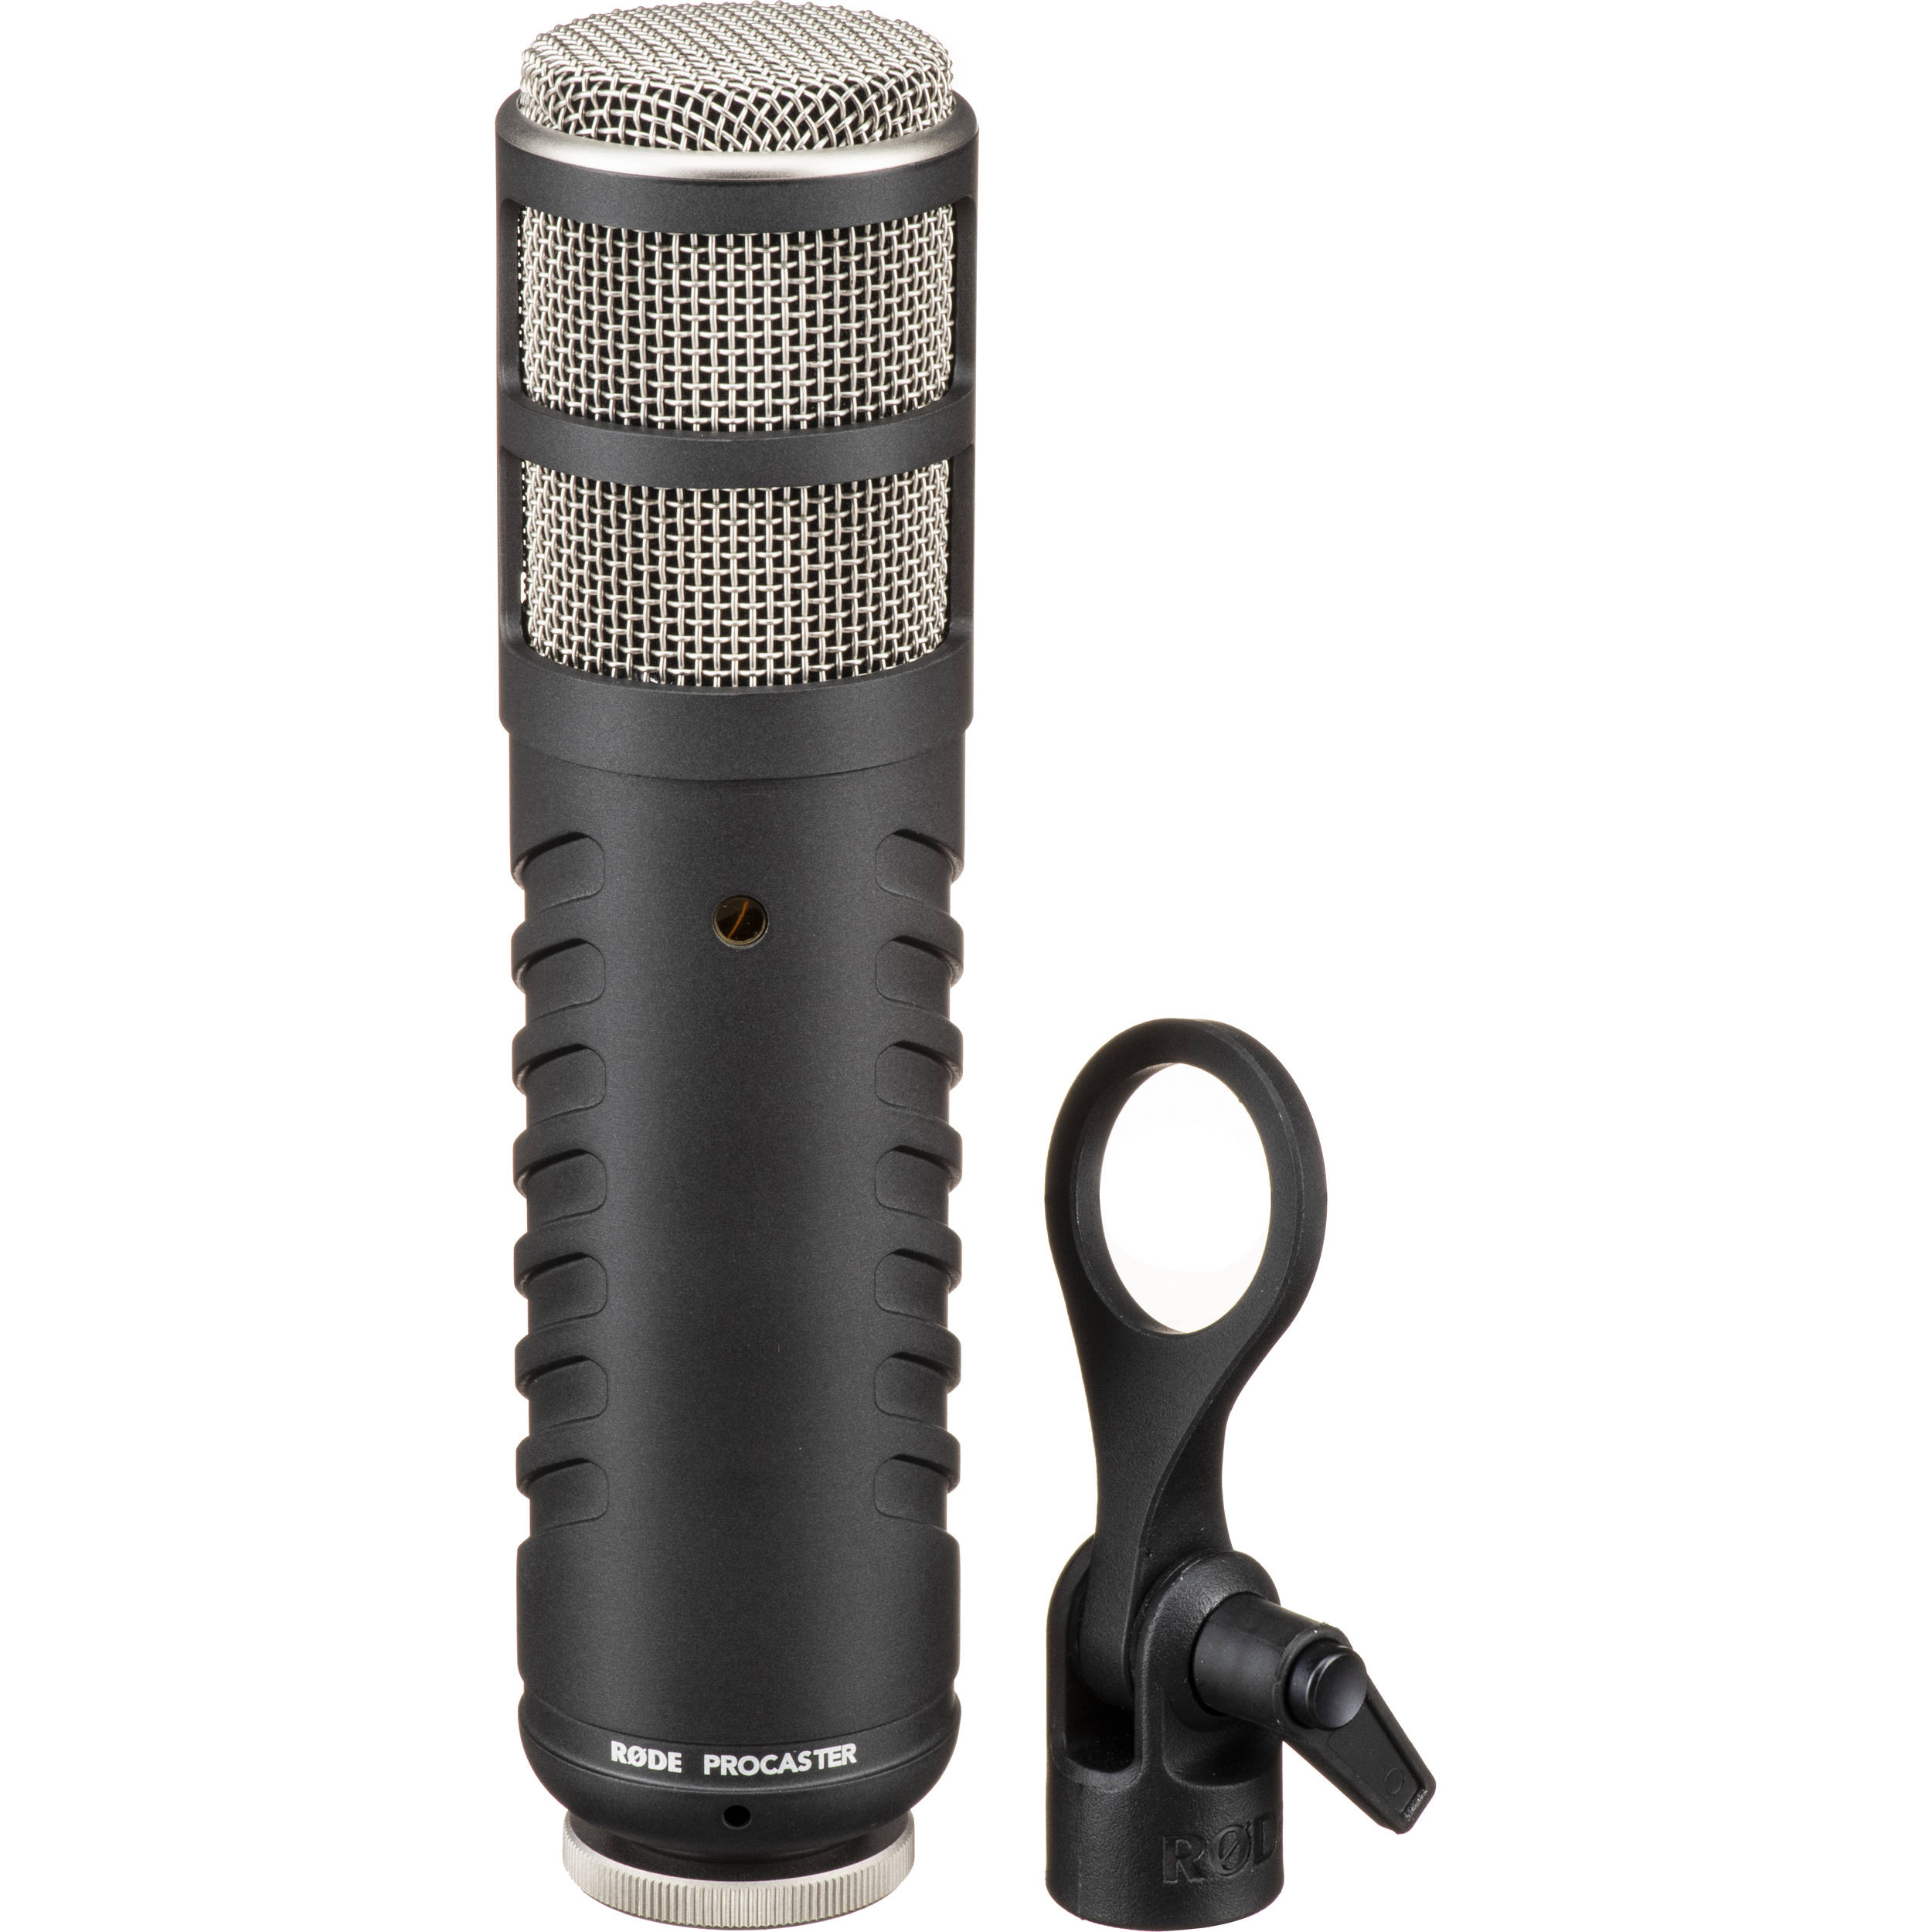 What’s a Dynamic Microphone? Why is it Special?